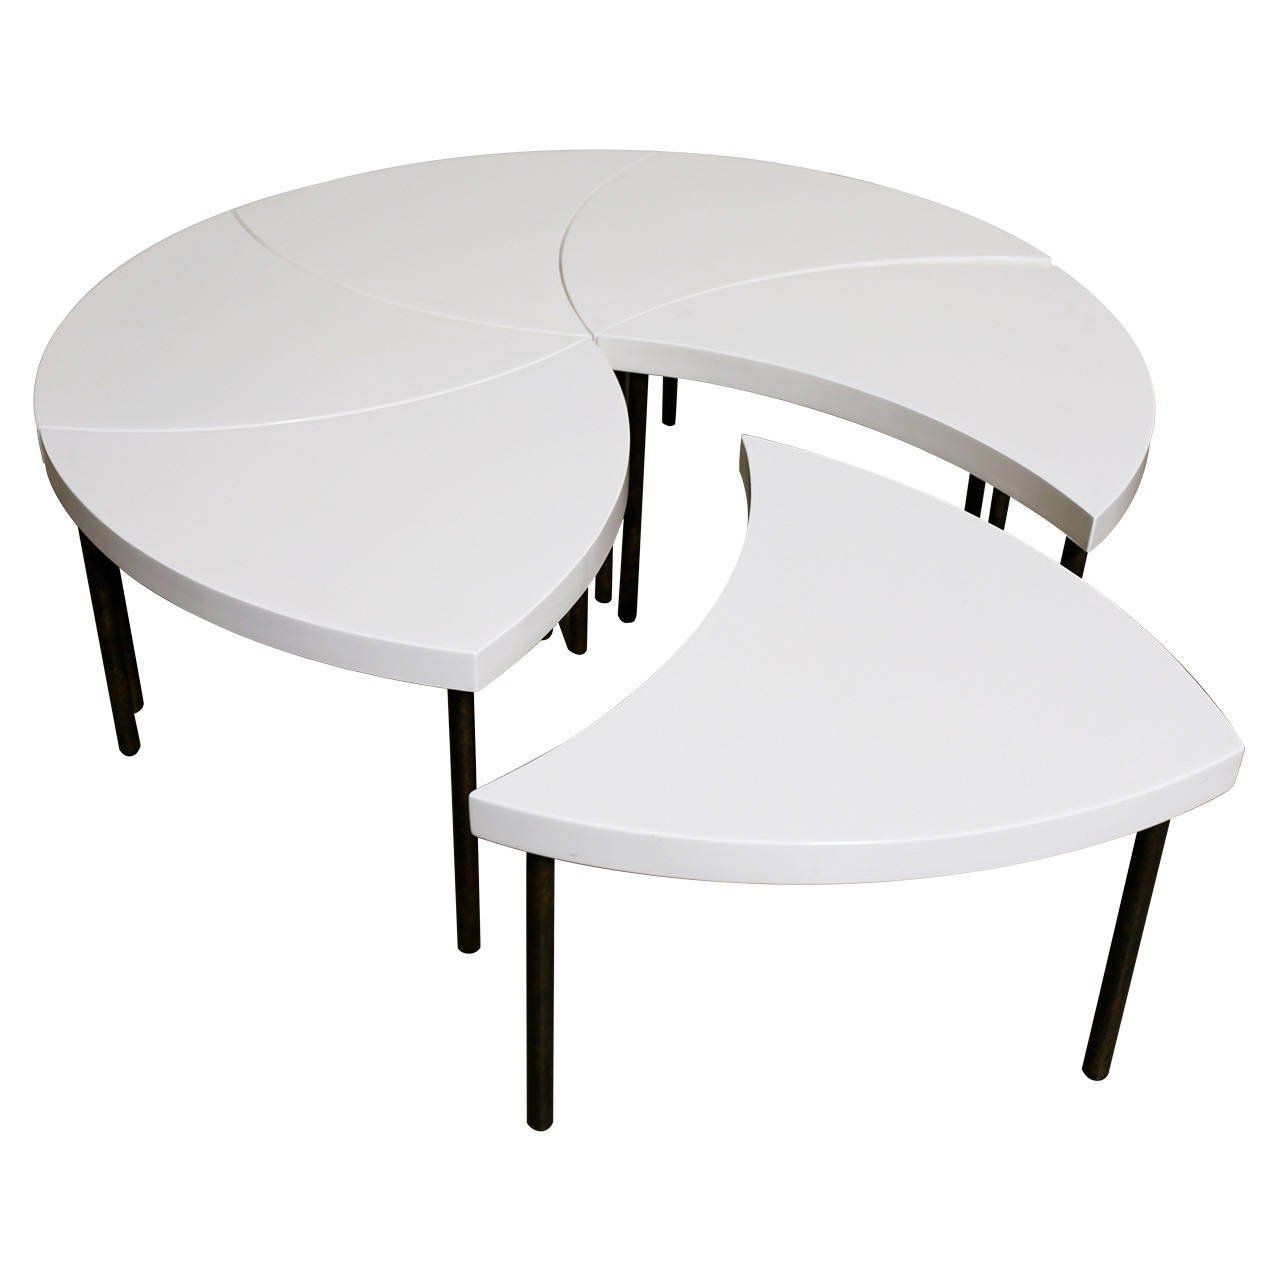 Modernist Modular "pinwheel" Coffee Table For Sale At 1stdibs Inside Most Popular Modular Coffee Tables (View 1 of 20)